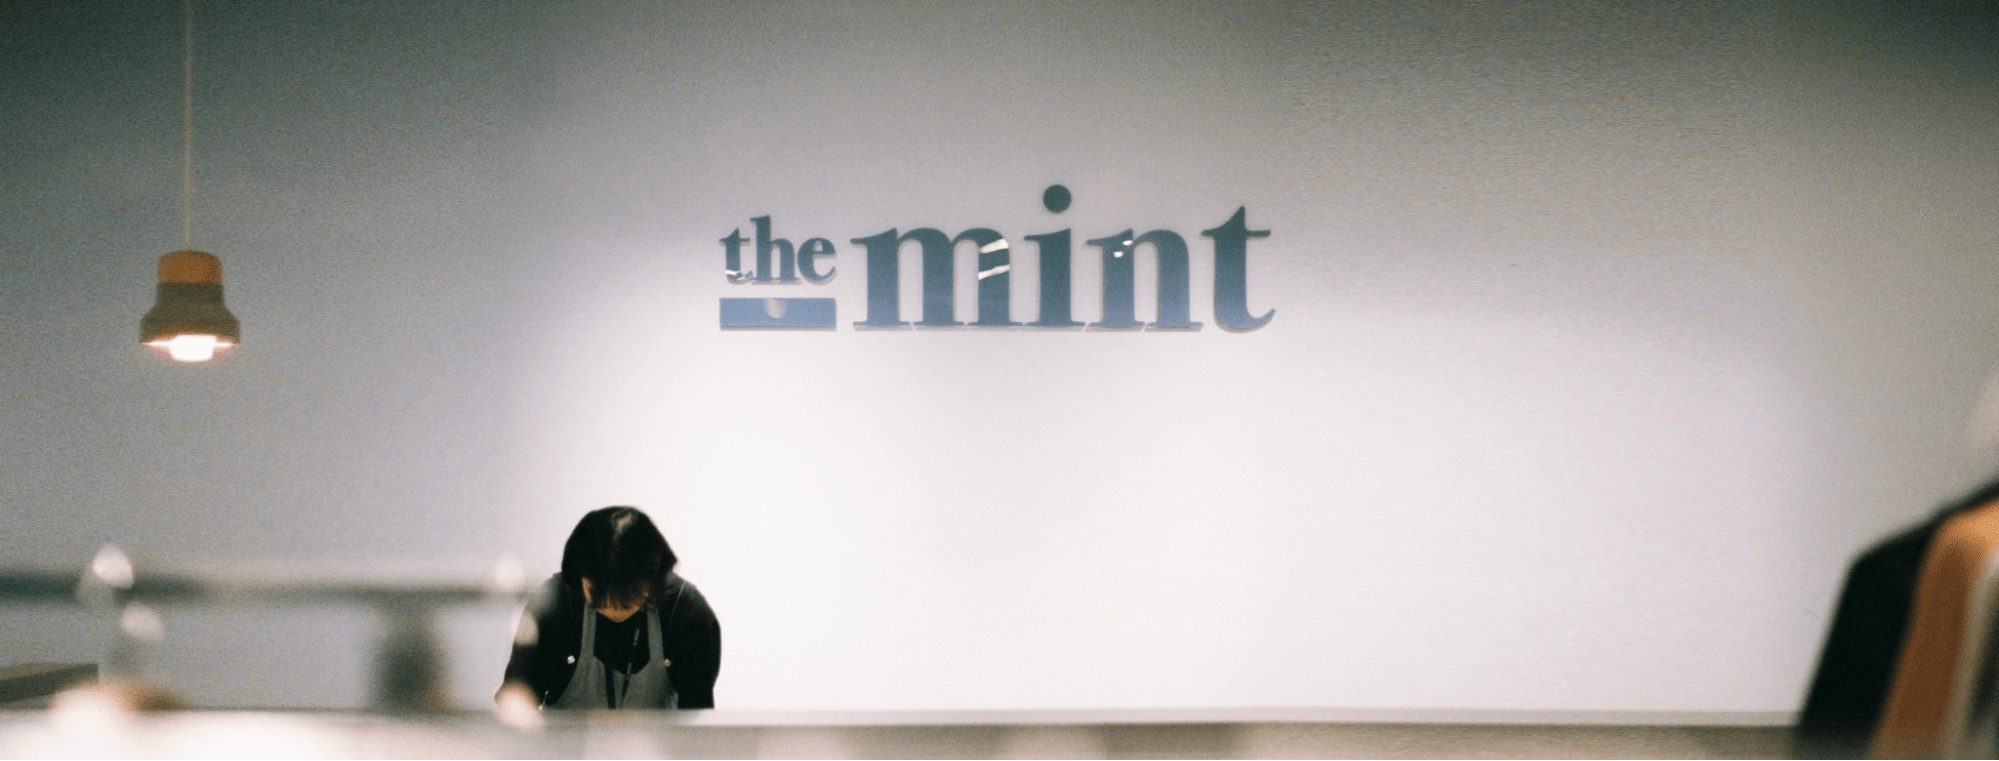 the mint